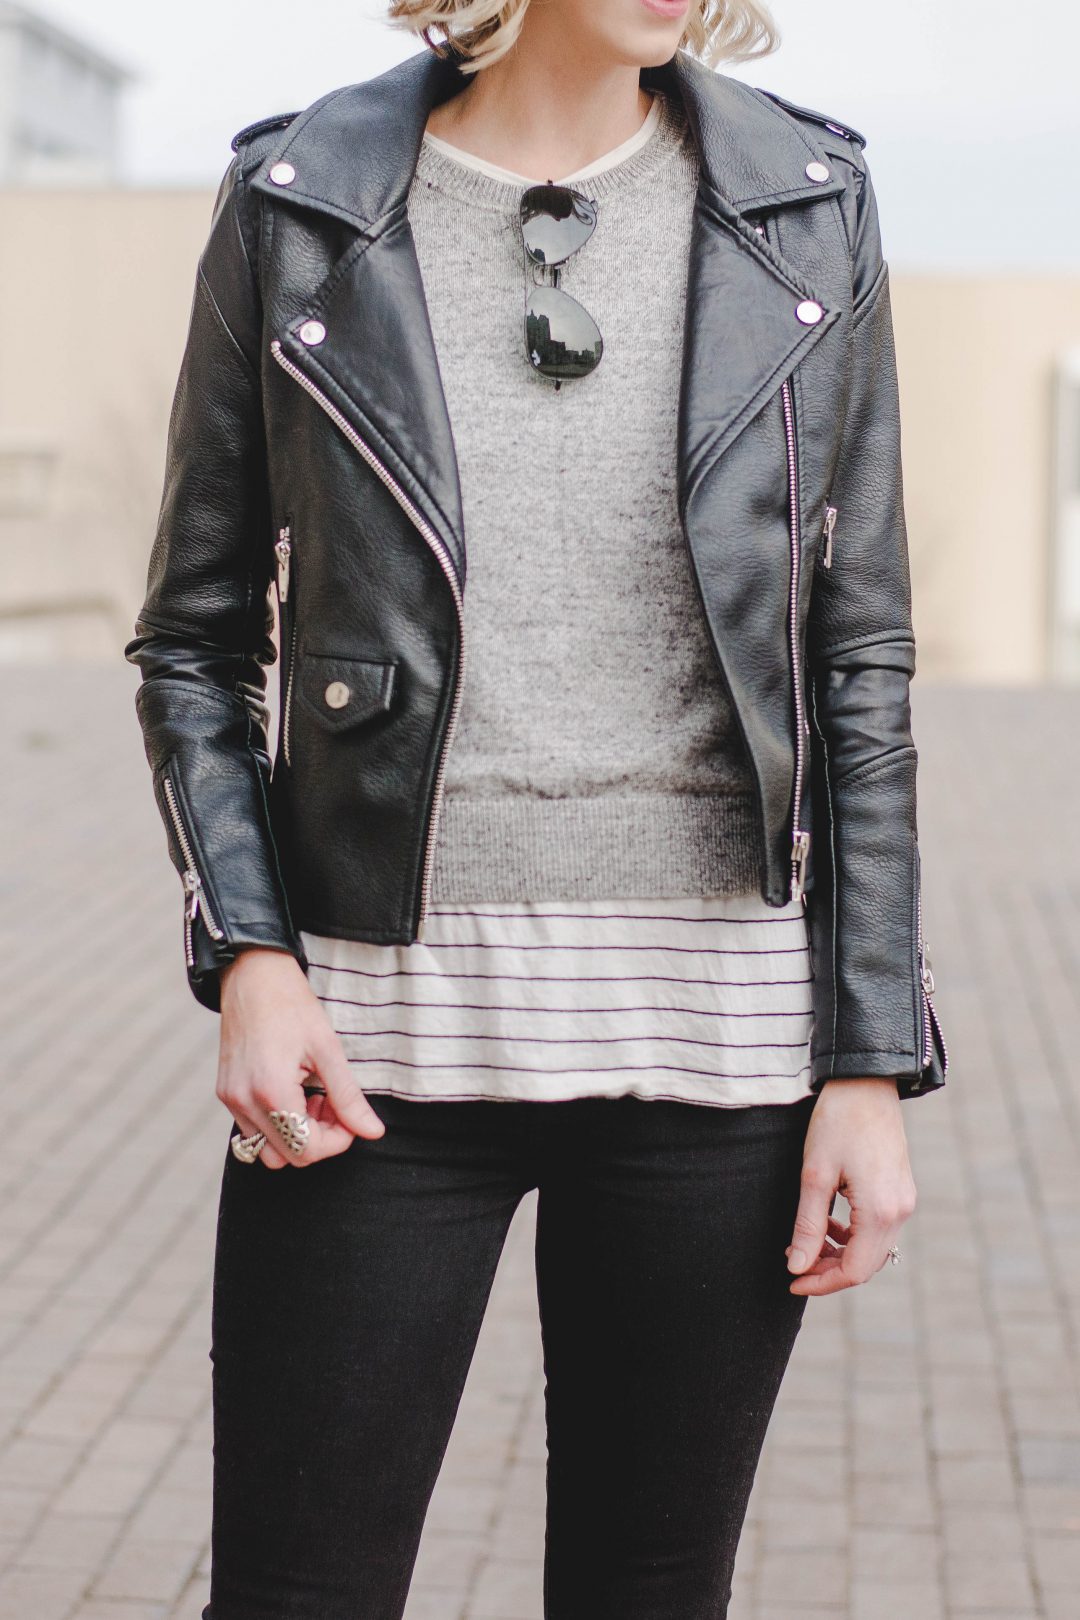 How to Wear a Leather Jacket - Straight A Style